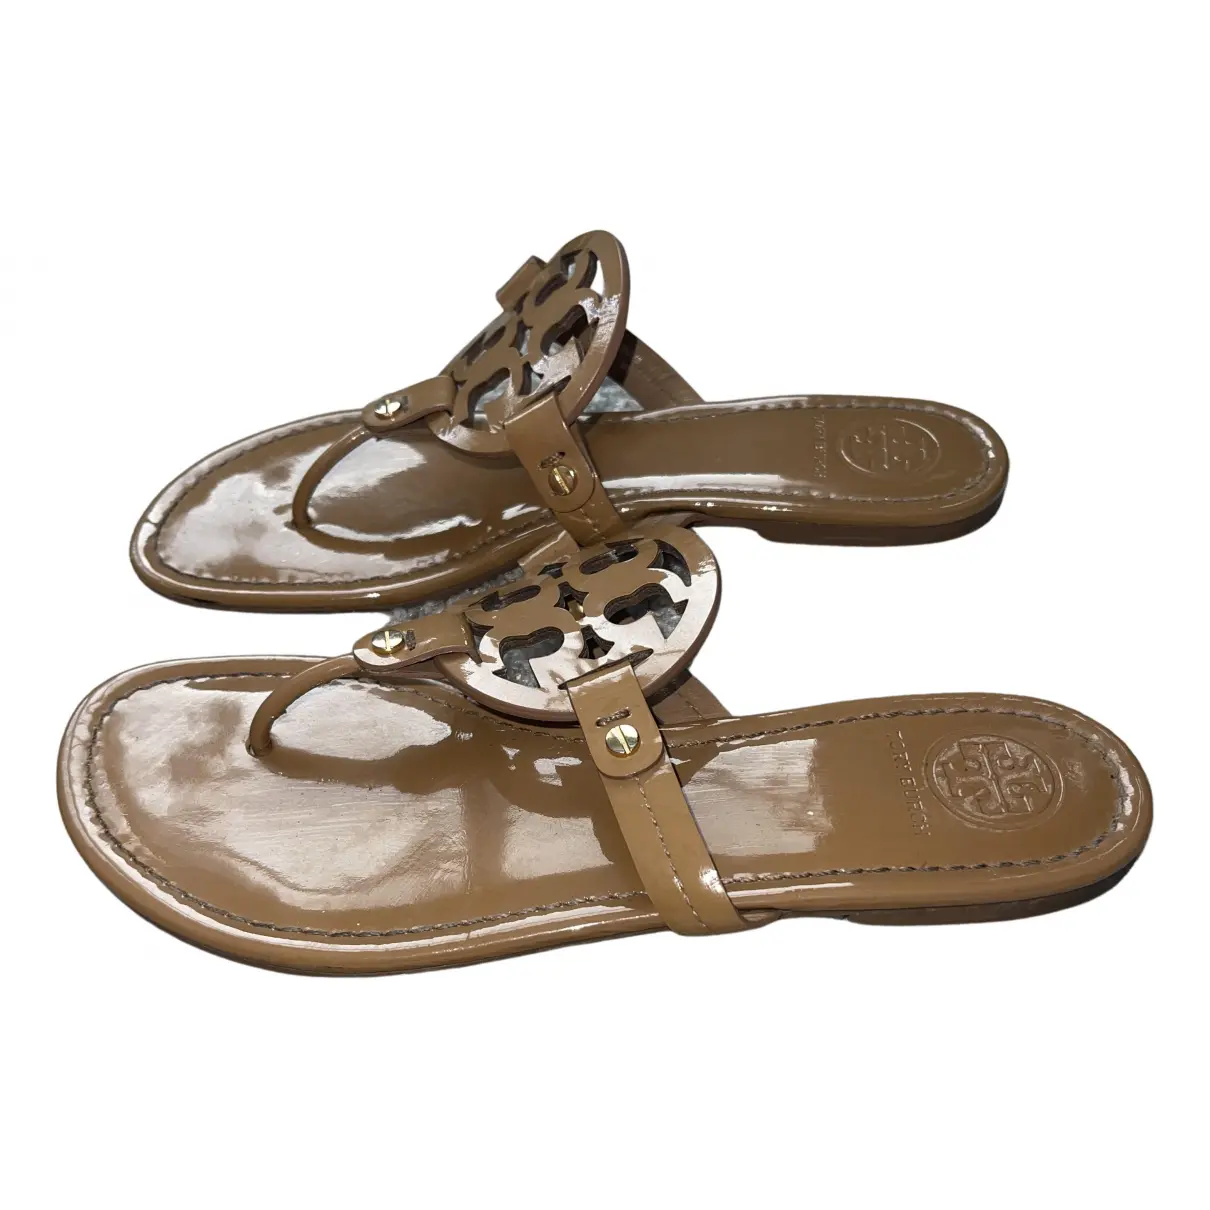 Patent leather sandal Tory Burch